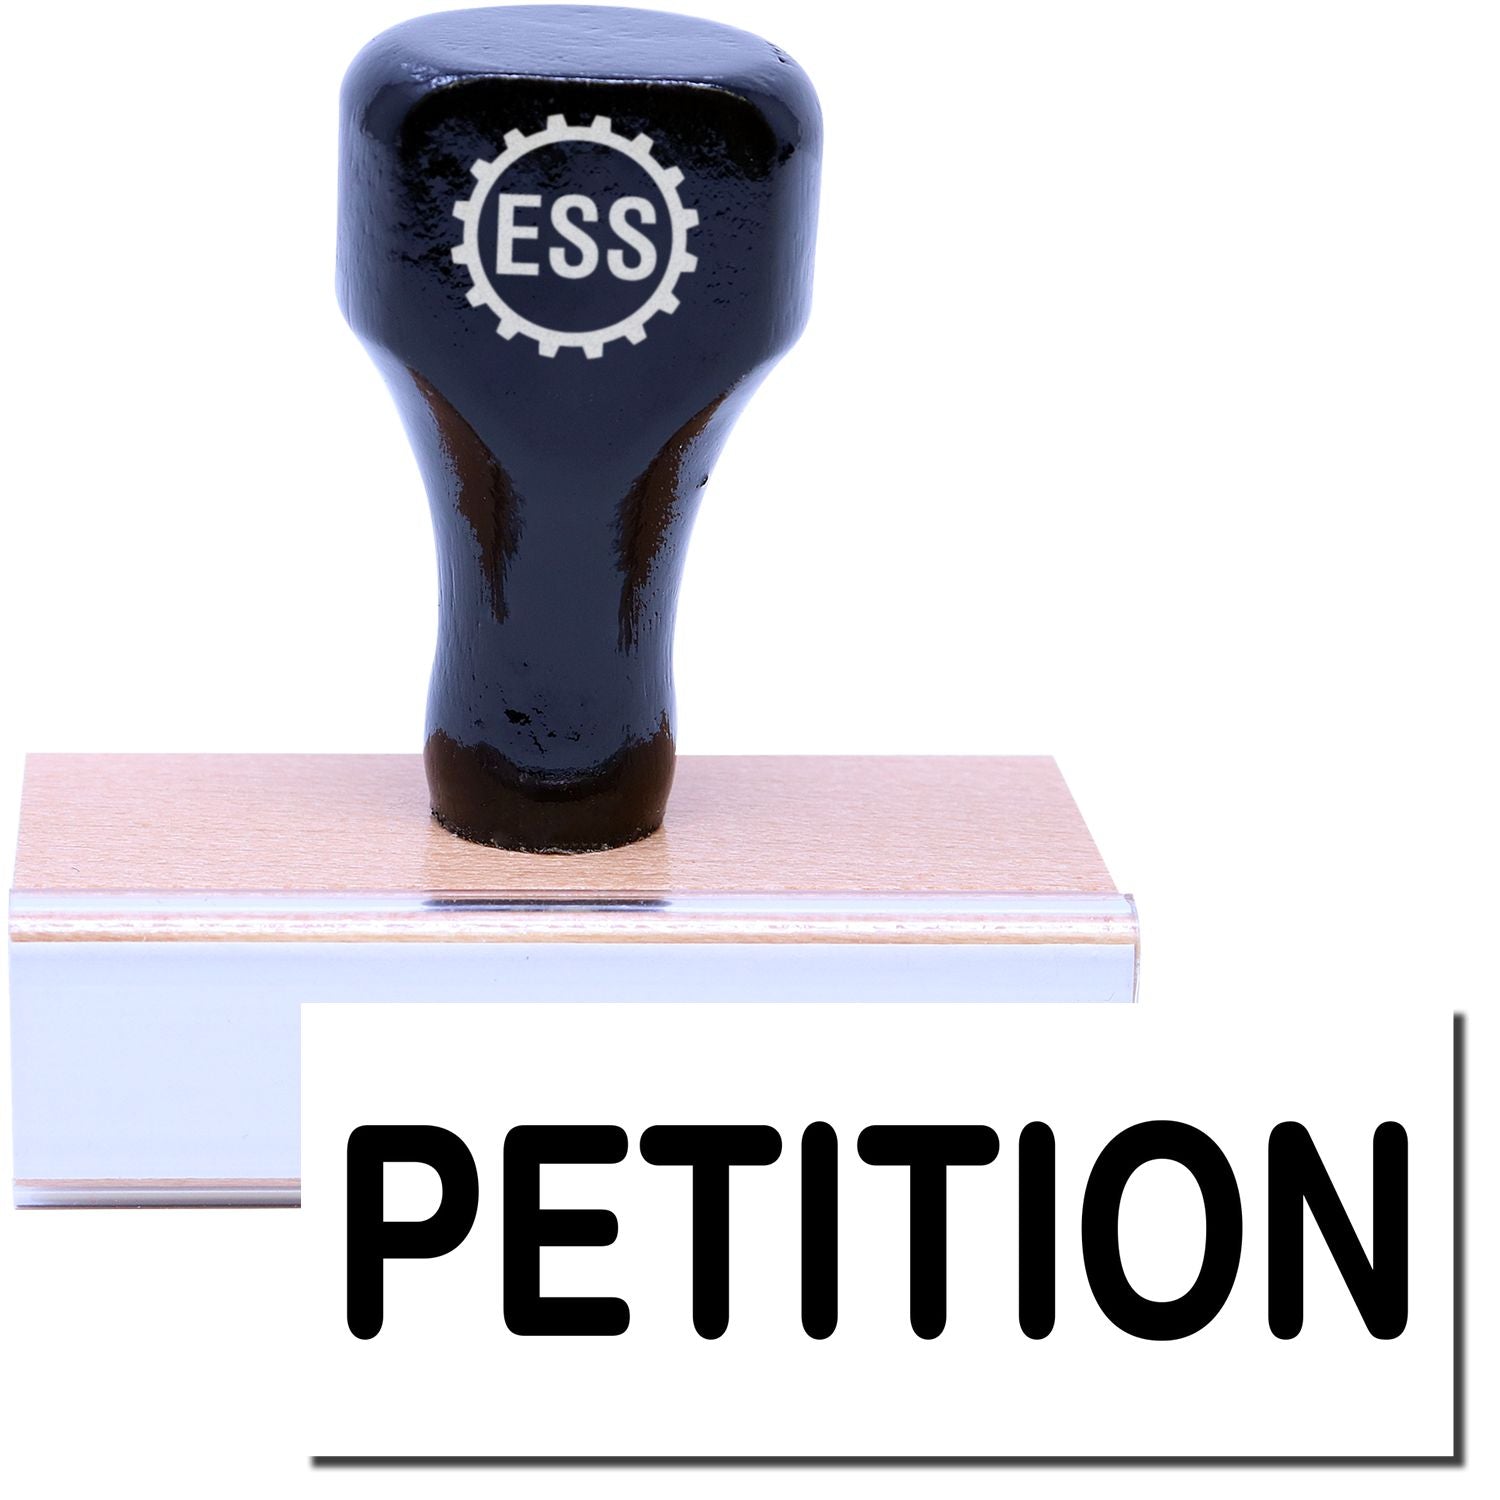 A stock office rubber stamp with a stamped image showing how the text "PETITION" is displayed after stamping.